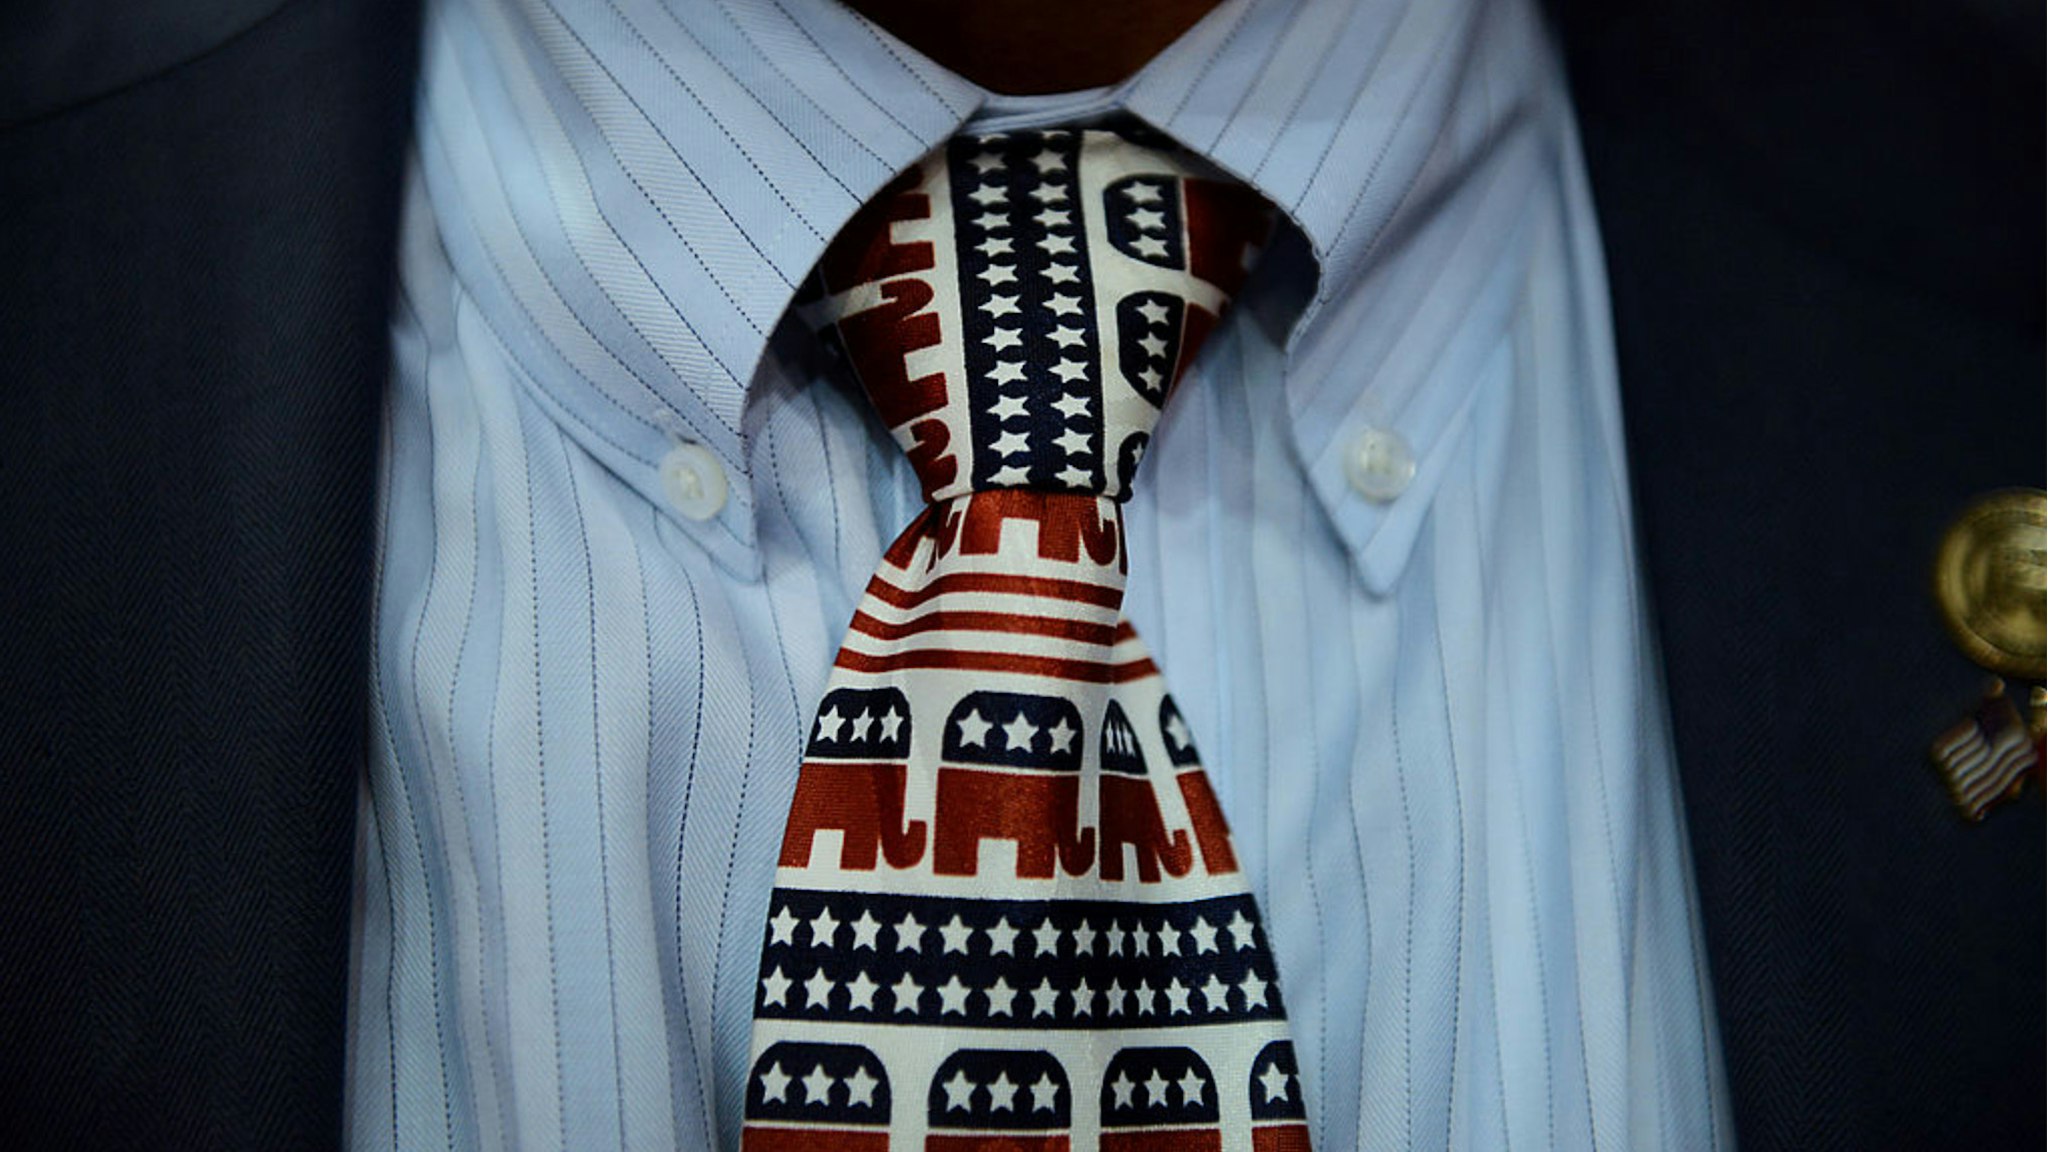 Will Deschamps, state chairman of Montana, wears a tie decorated with elephant mascots at the Republican National Convention (RNC) in Tampa, Florida, U.S., on Thursday, Aug. 30, 2012.